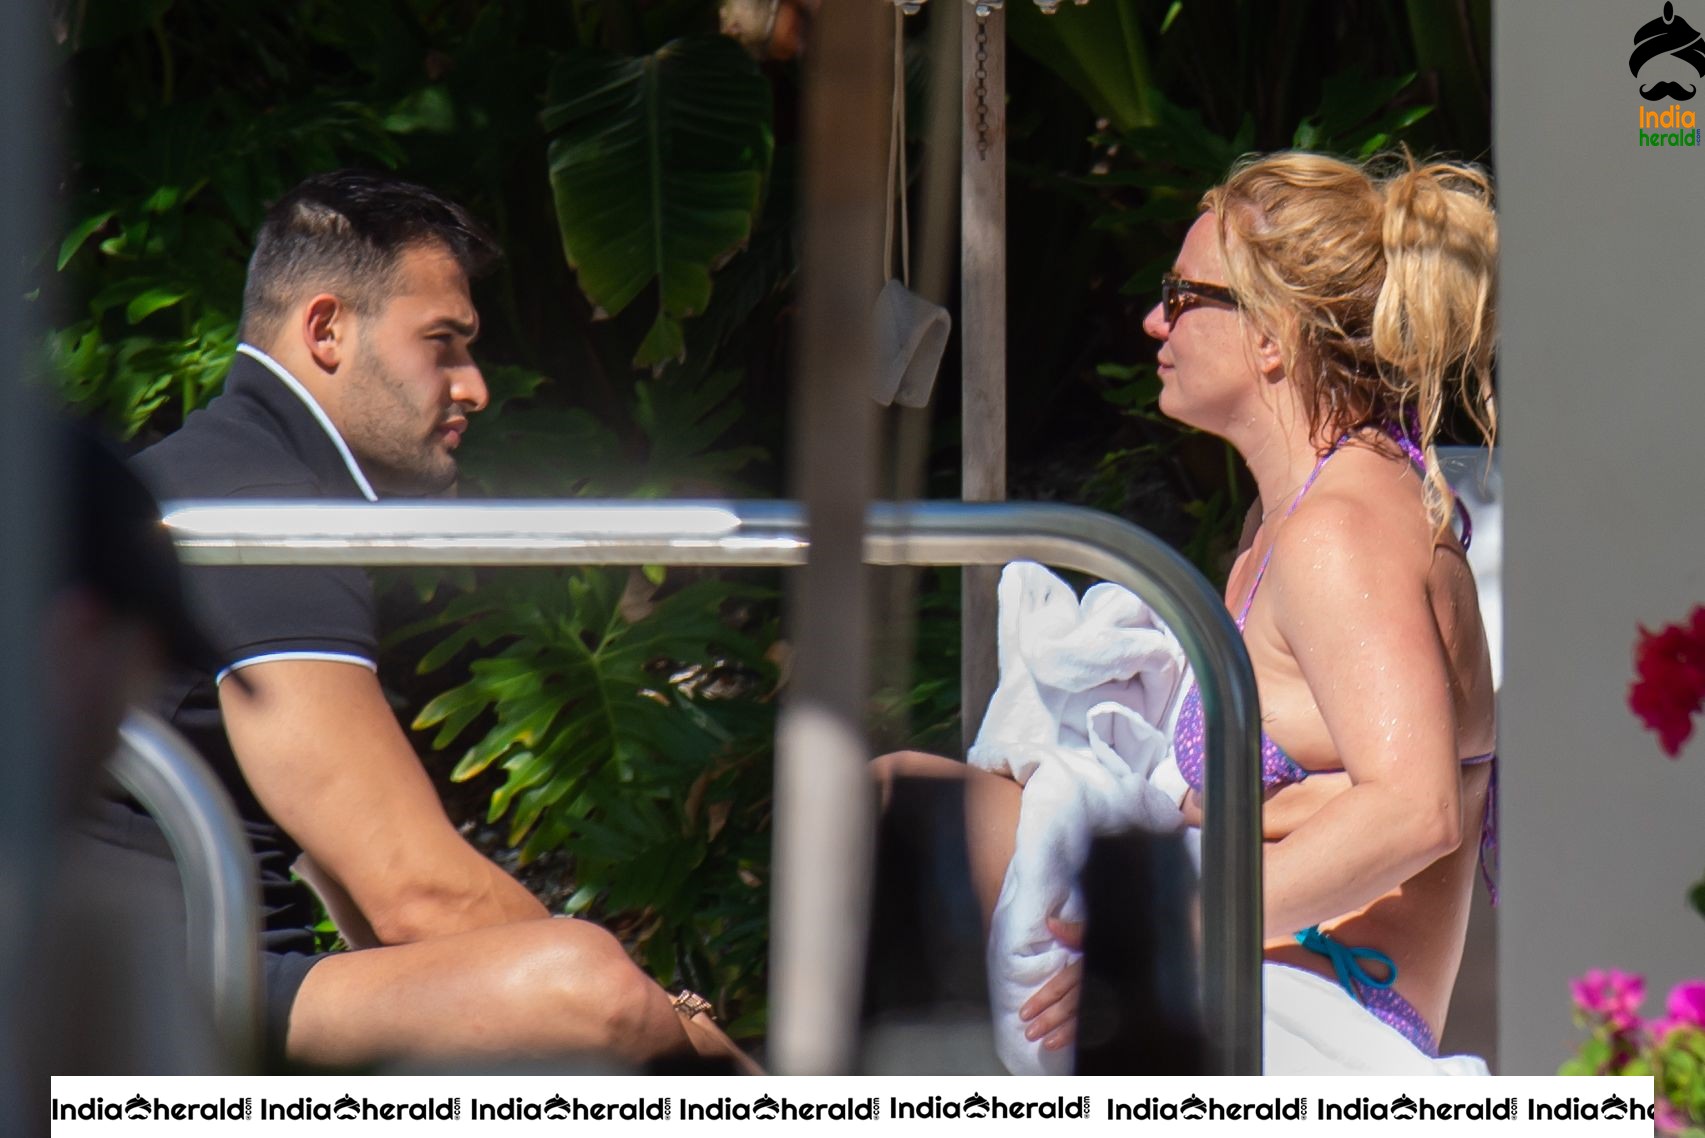 Britney Spears caught in Bikini while sunbathing by poolside in Miami